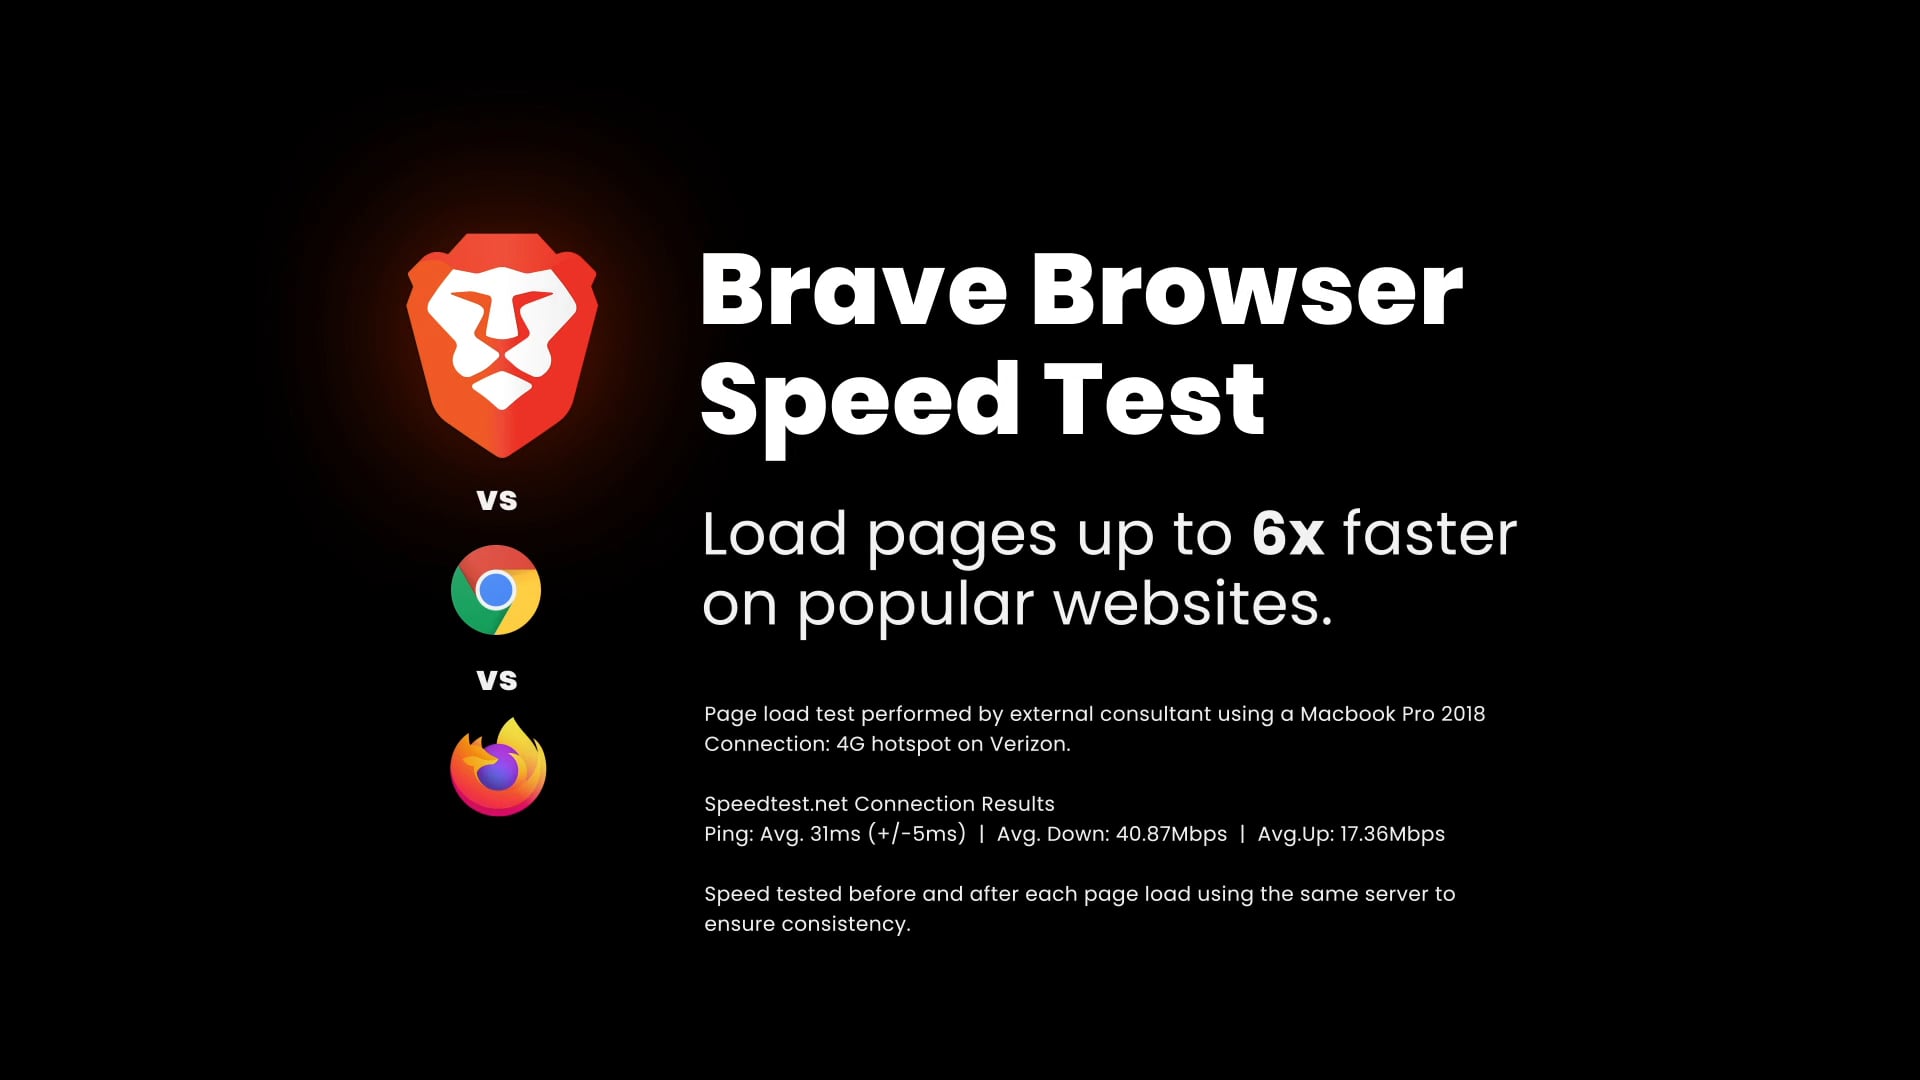 Brave Brower is the fastest browser in the world